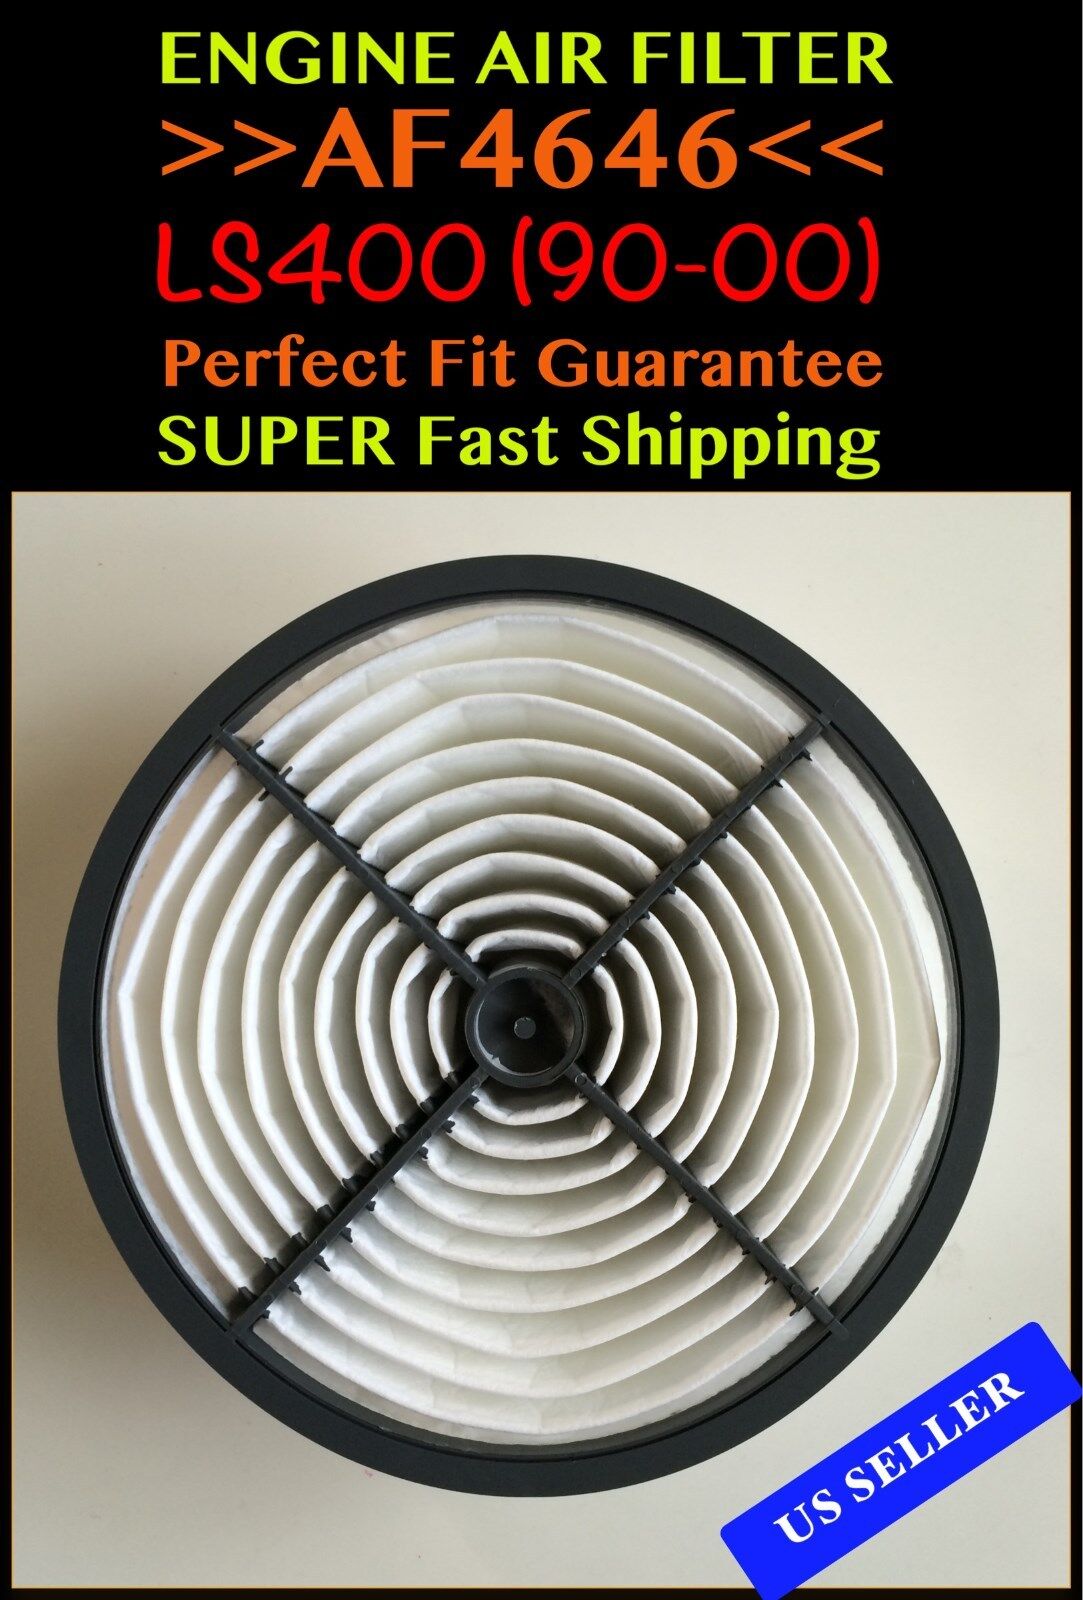 LS400 90-00 Air Filter HIGH Quality Perfect Fit Guarantee A+++ AF4646